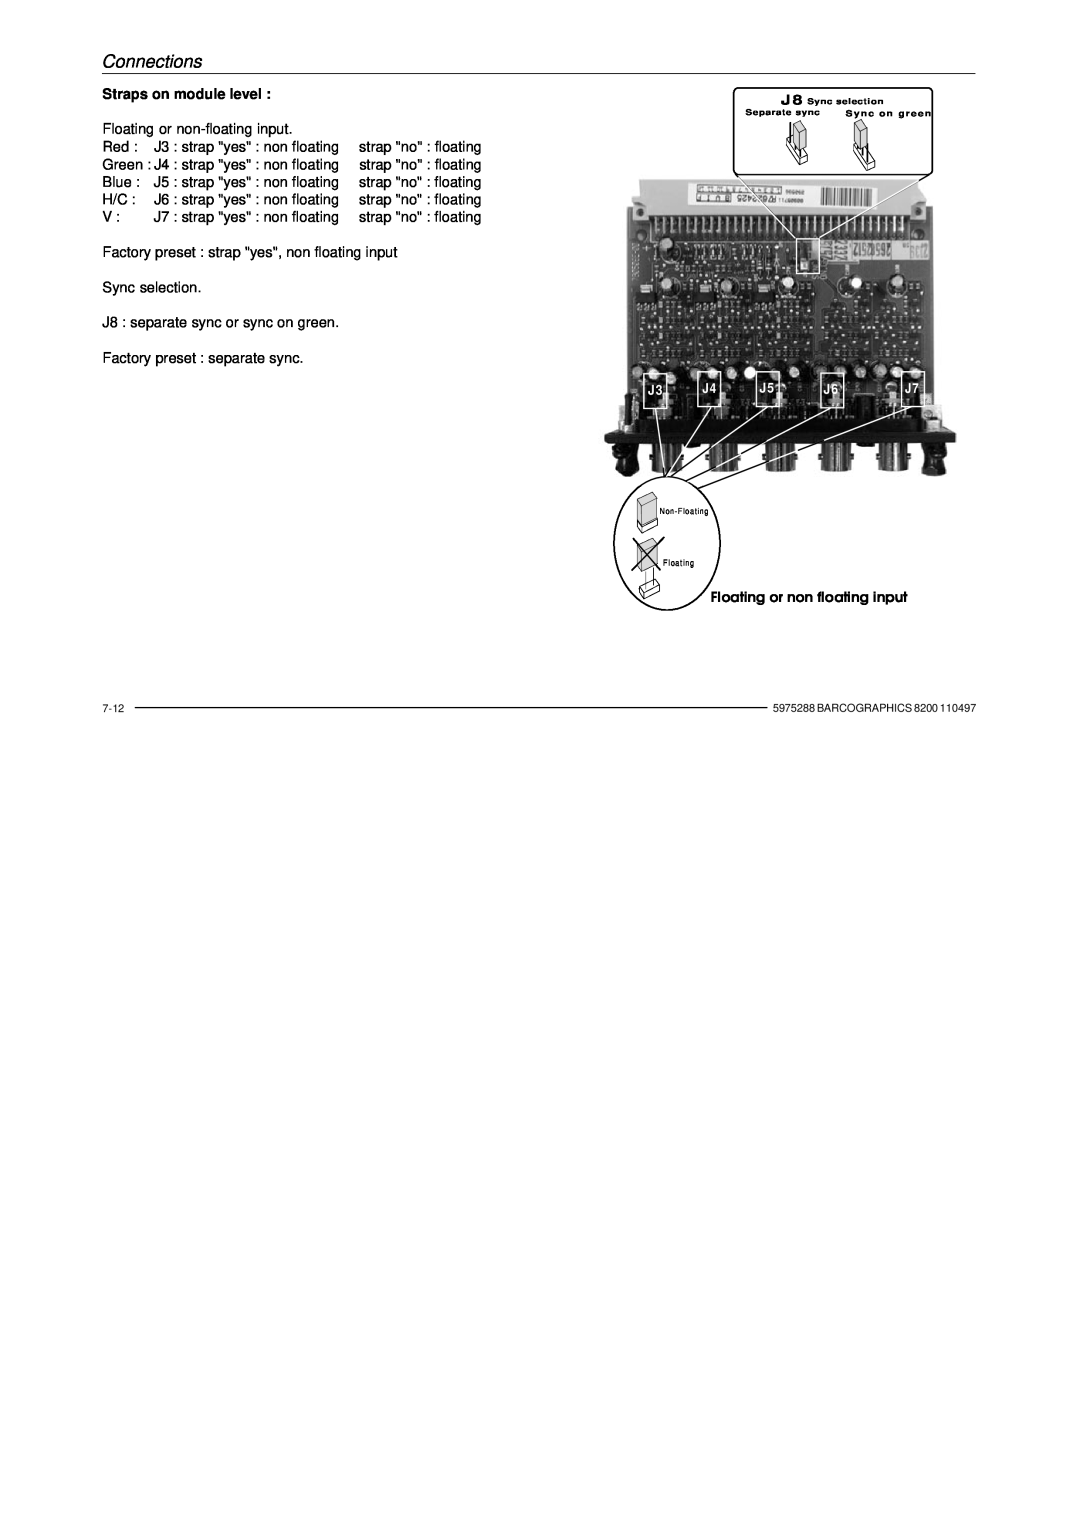 Barco R9001330 owner manual Connections, Straps on module level 